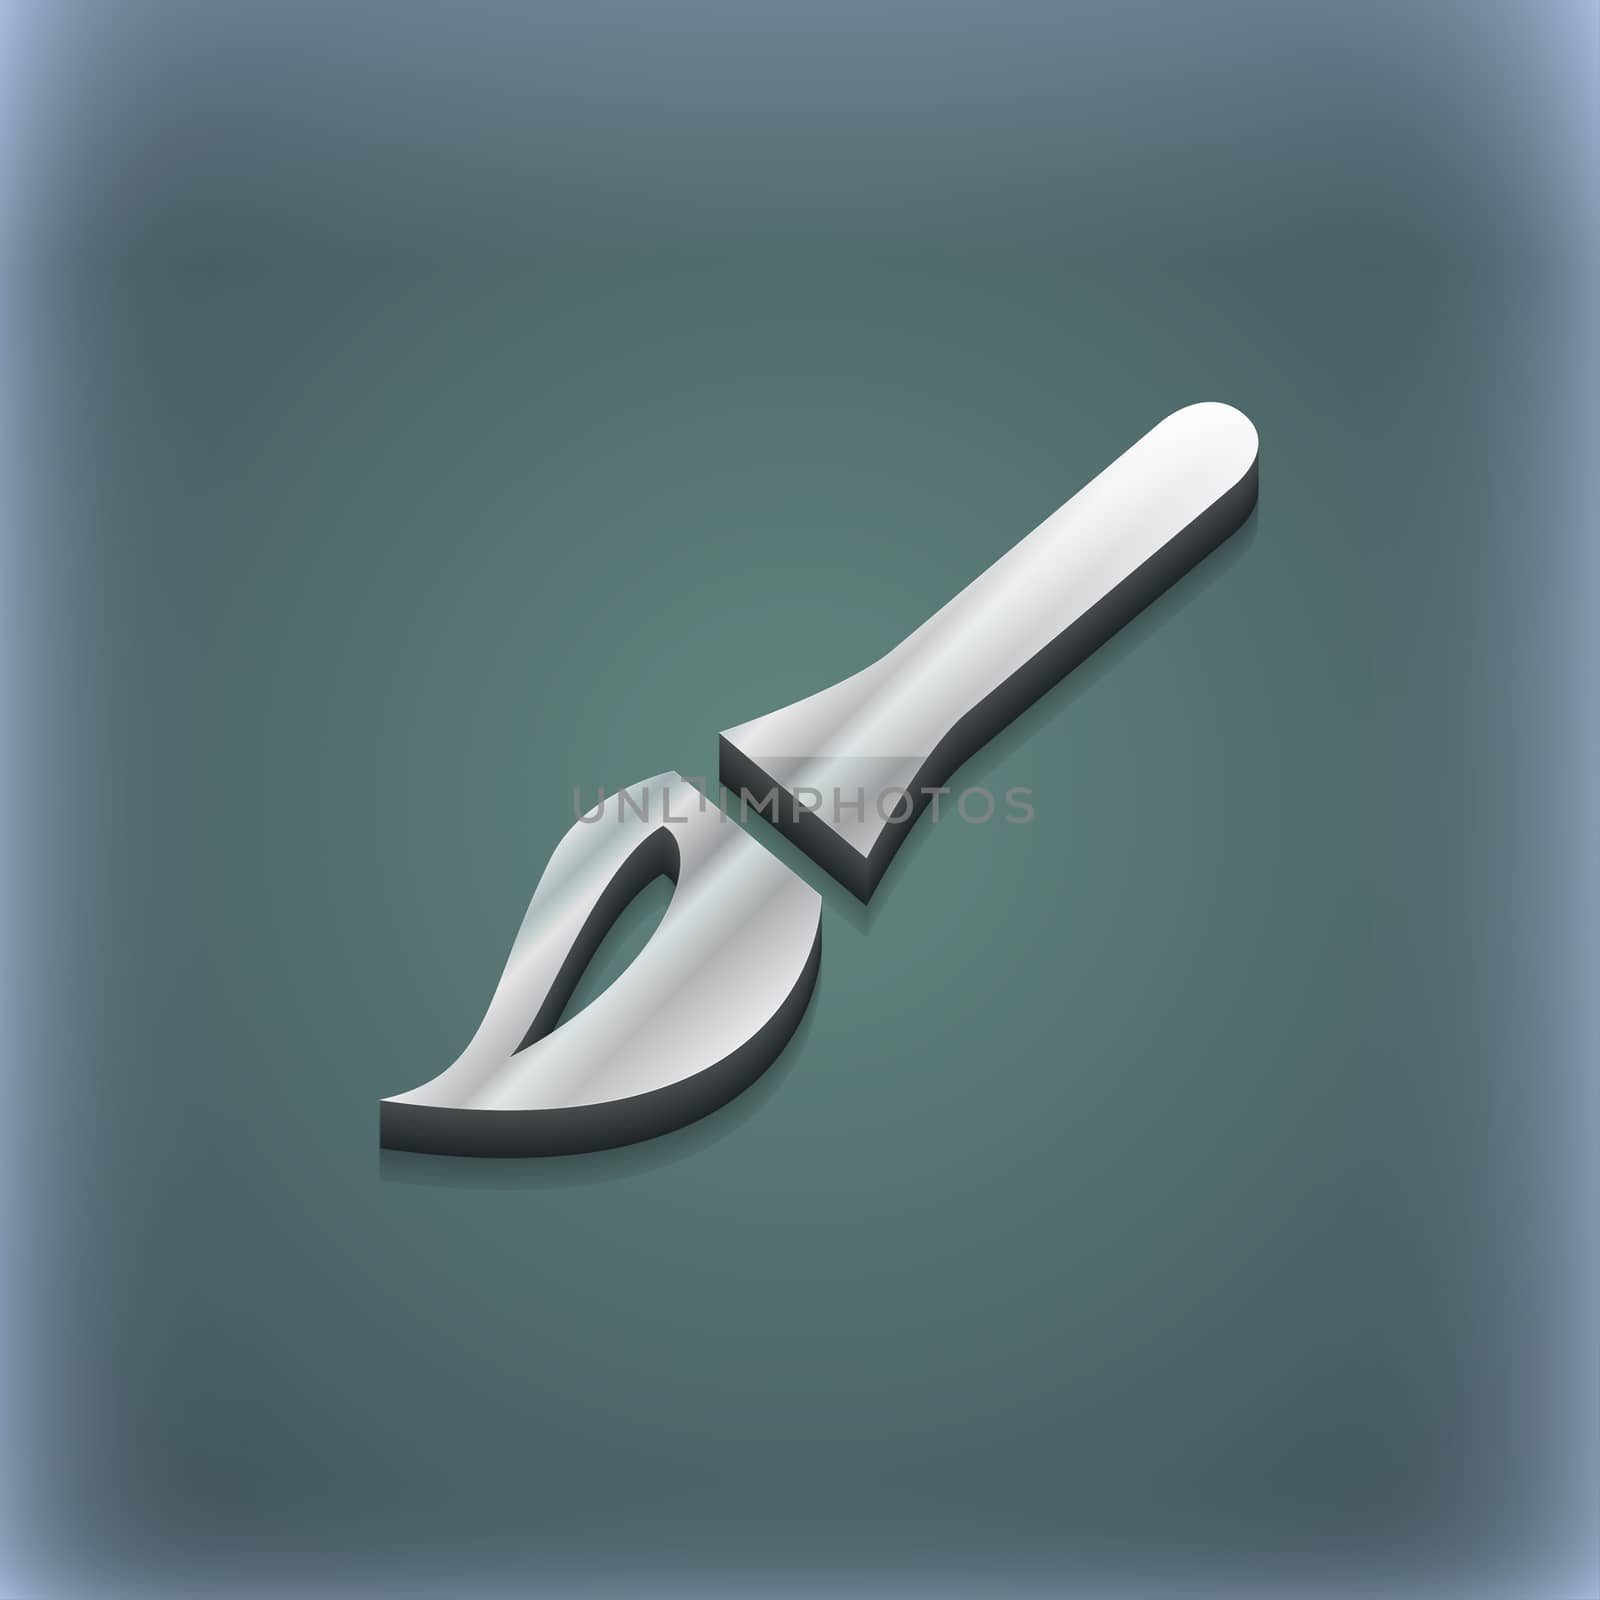 Paint brush, Artist icon symbol. 3D style. Trendy, modern design with space for your text illustration. Raster version